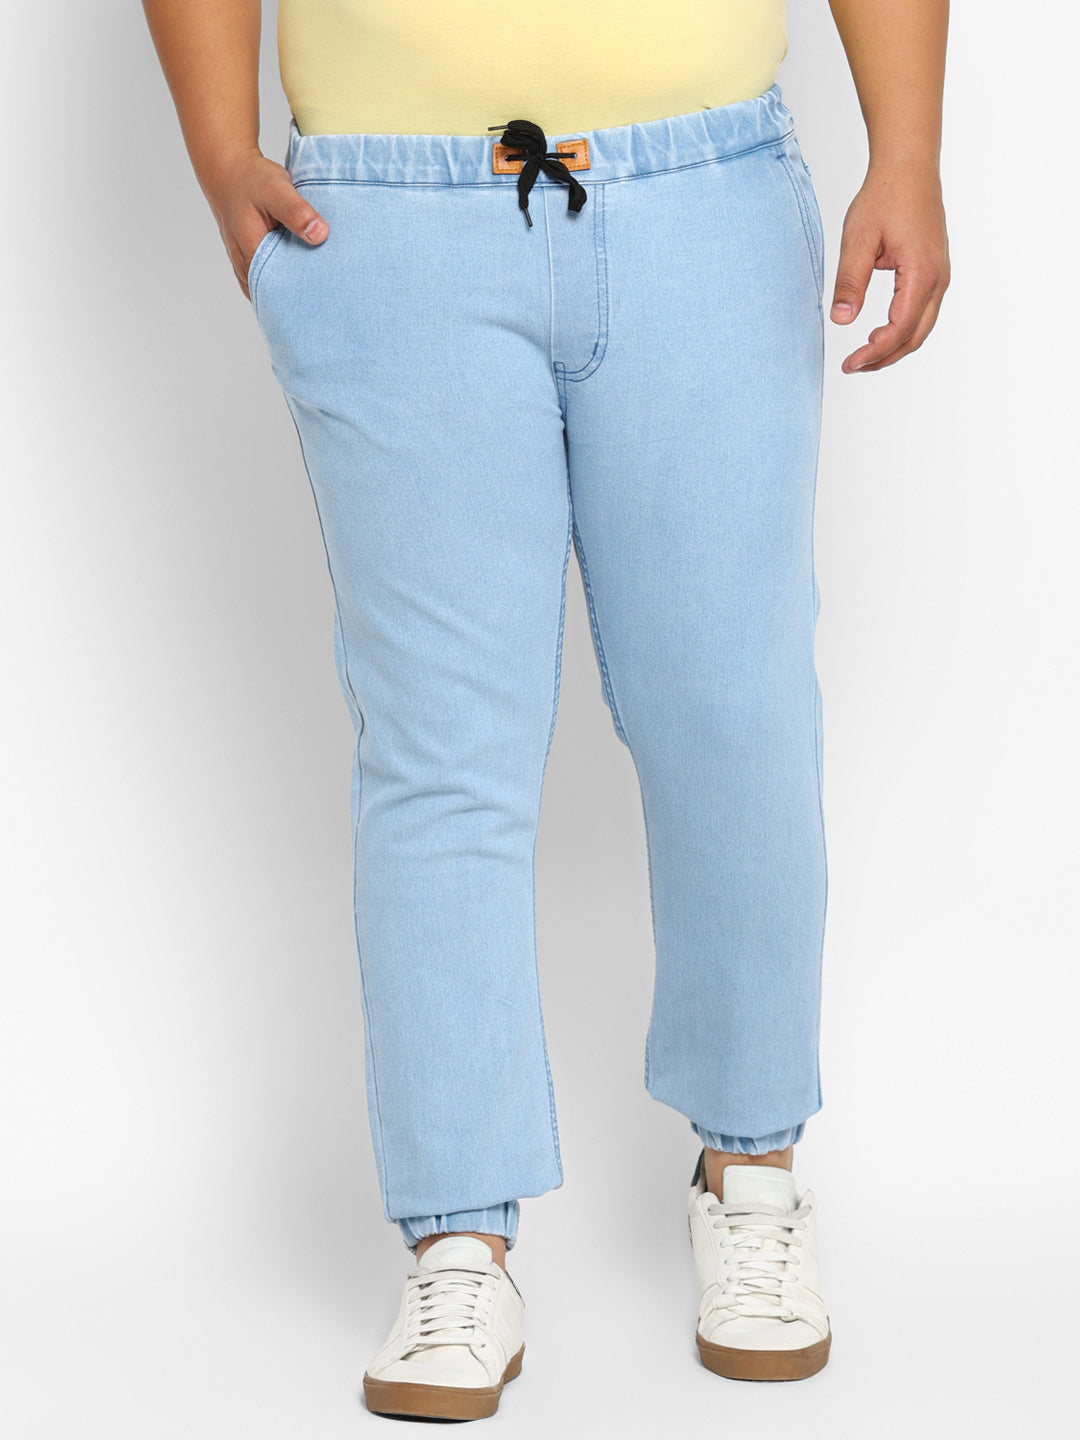 Urbano Plus Men's Ice Blue Regular Fit Washed Jogger Jeans Stretchable